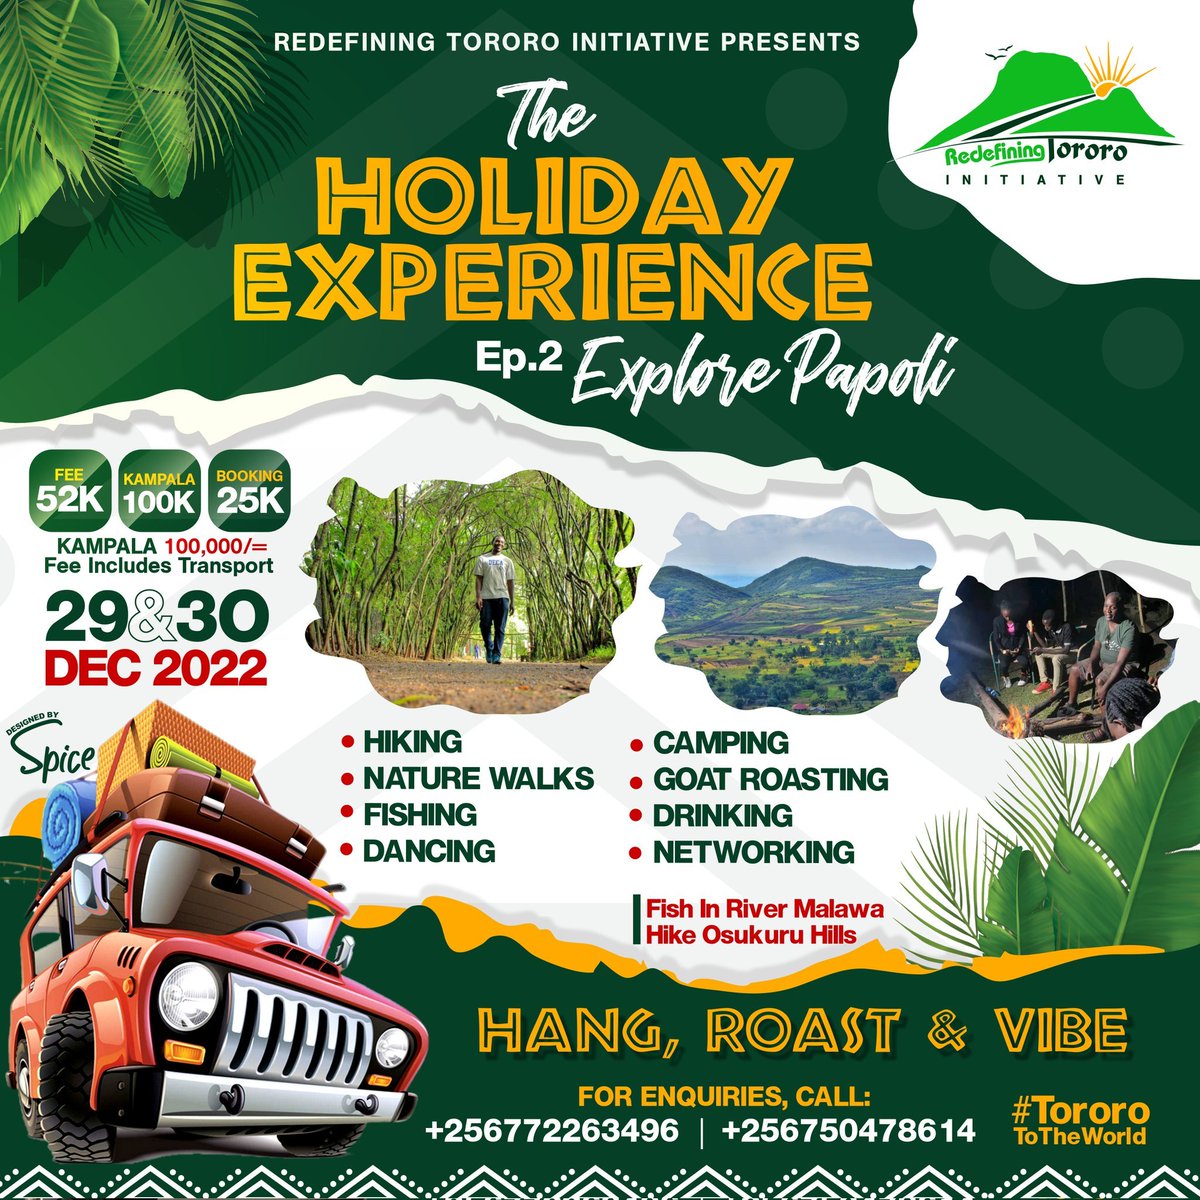 End the year in style by visiting eastern Uganda. Come and have fun while you get value for your money. 

#HolidayExperience #VisitTororo #TororoToTheWorld
#HangRoastVibe